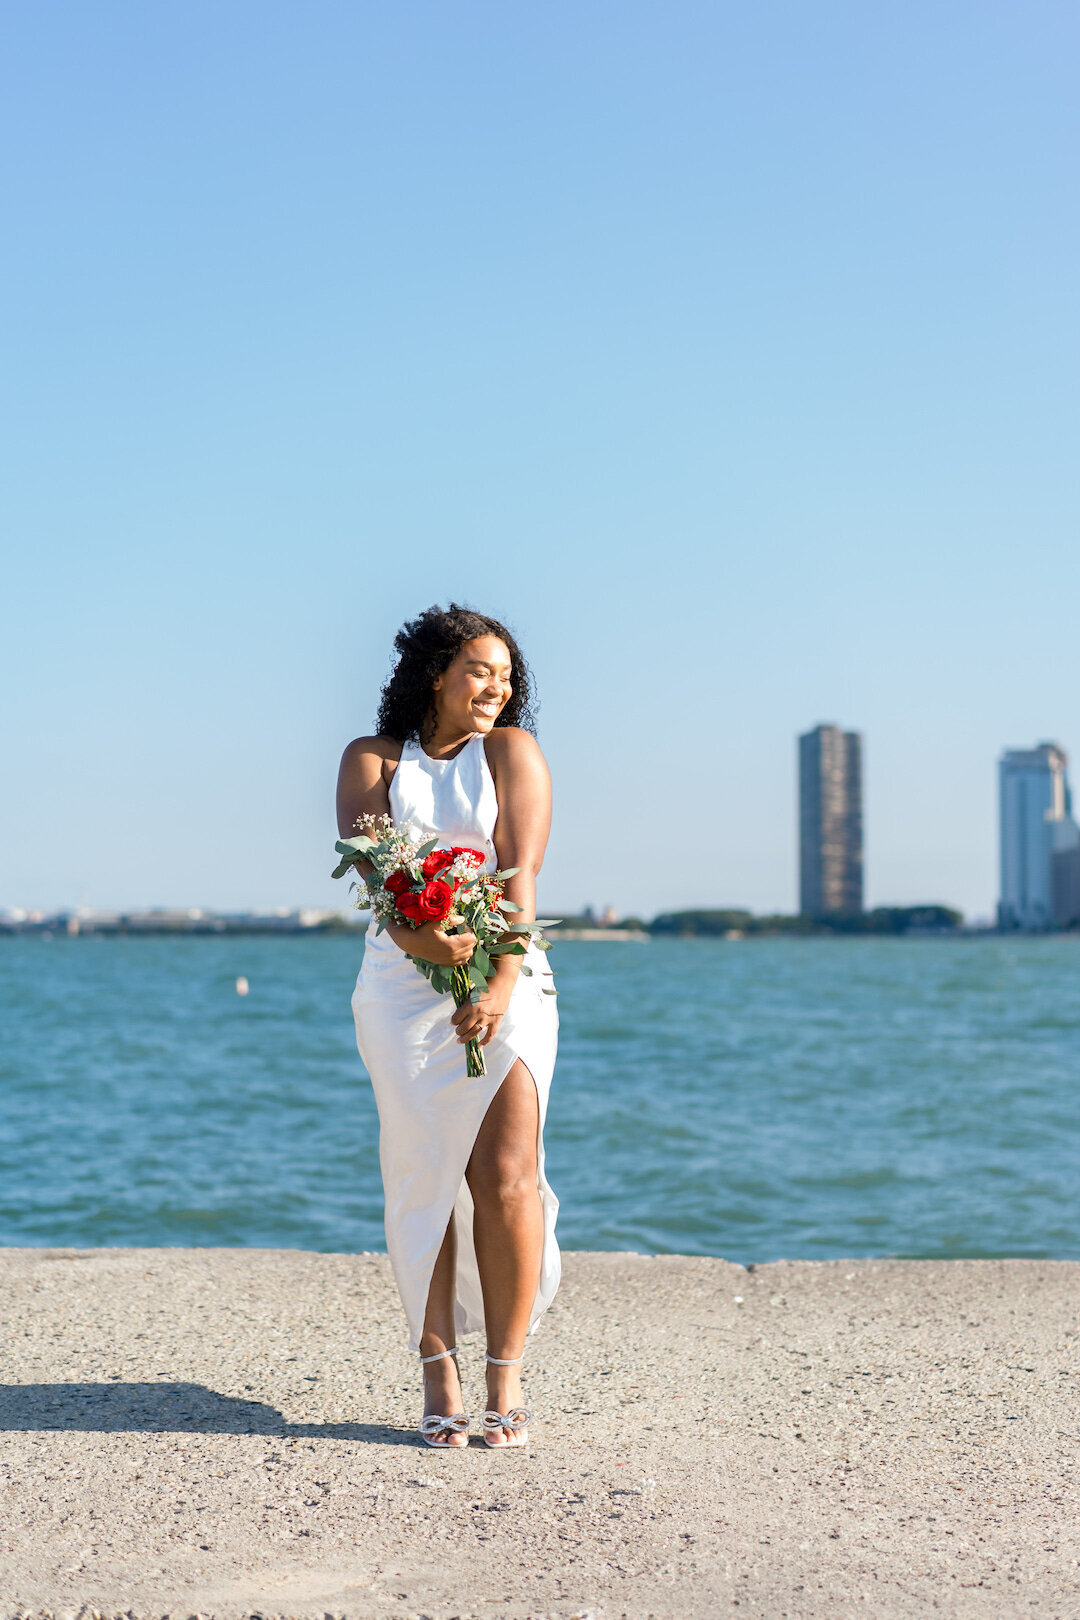 Eliana-Melmed-Photography-Chicago-Couples-Photography-Deluxe-5